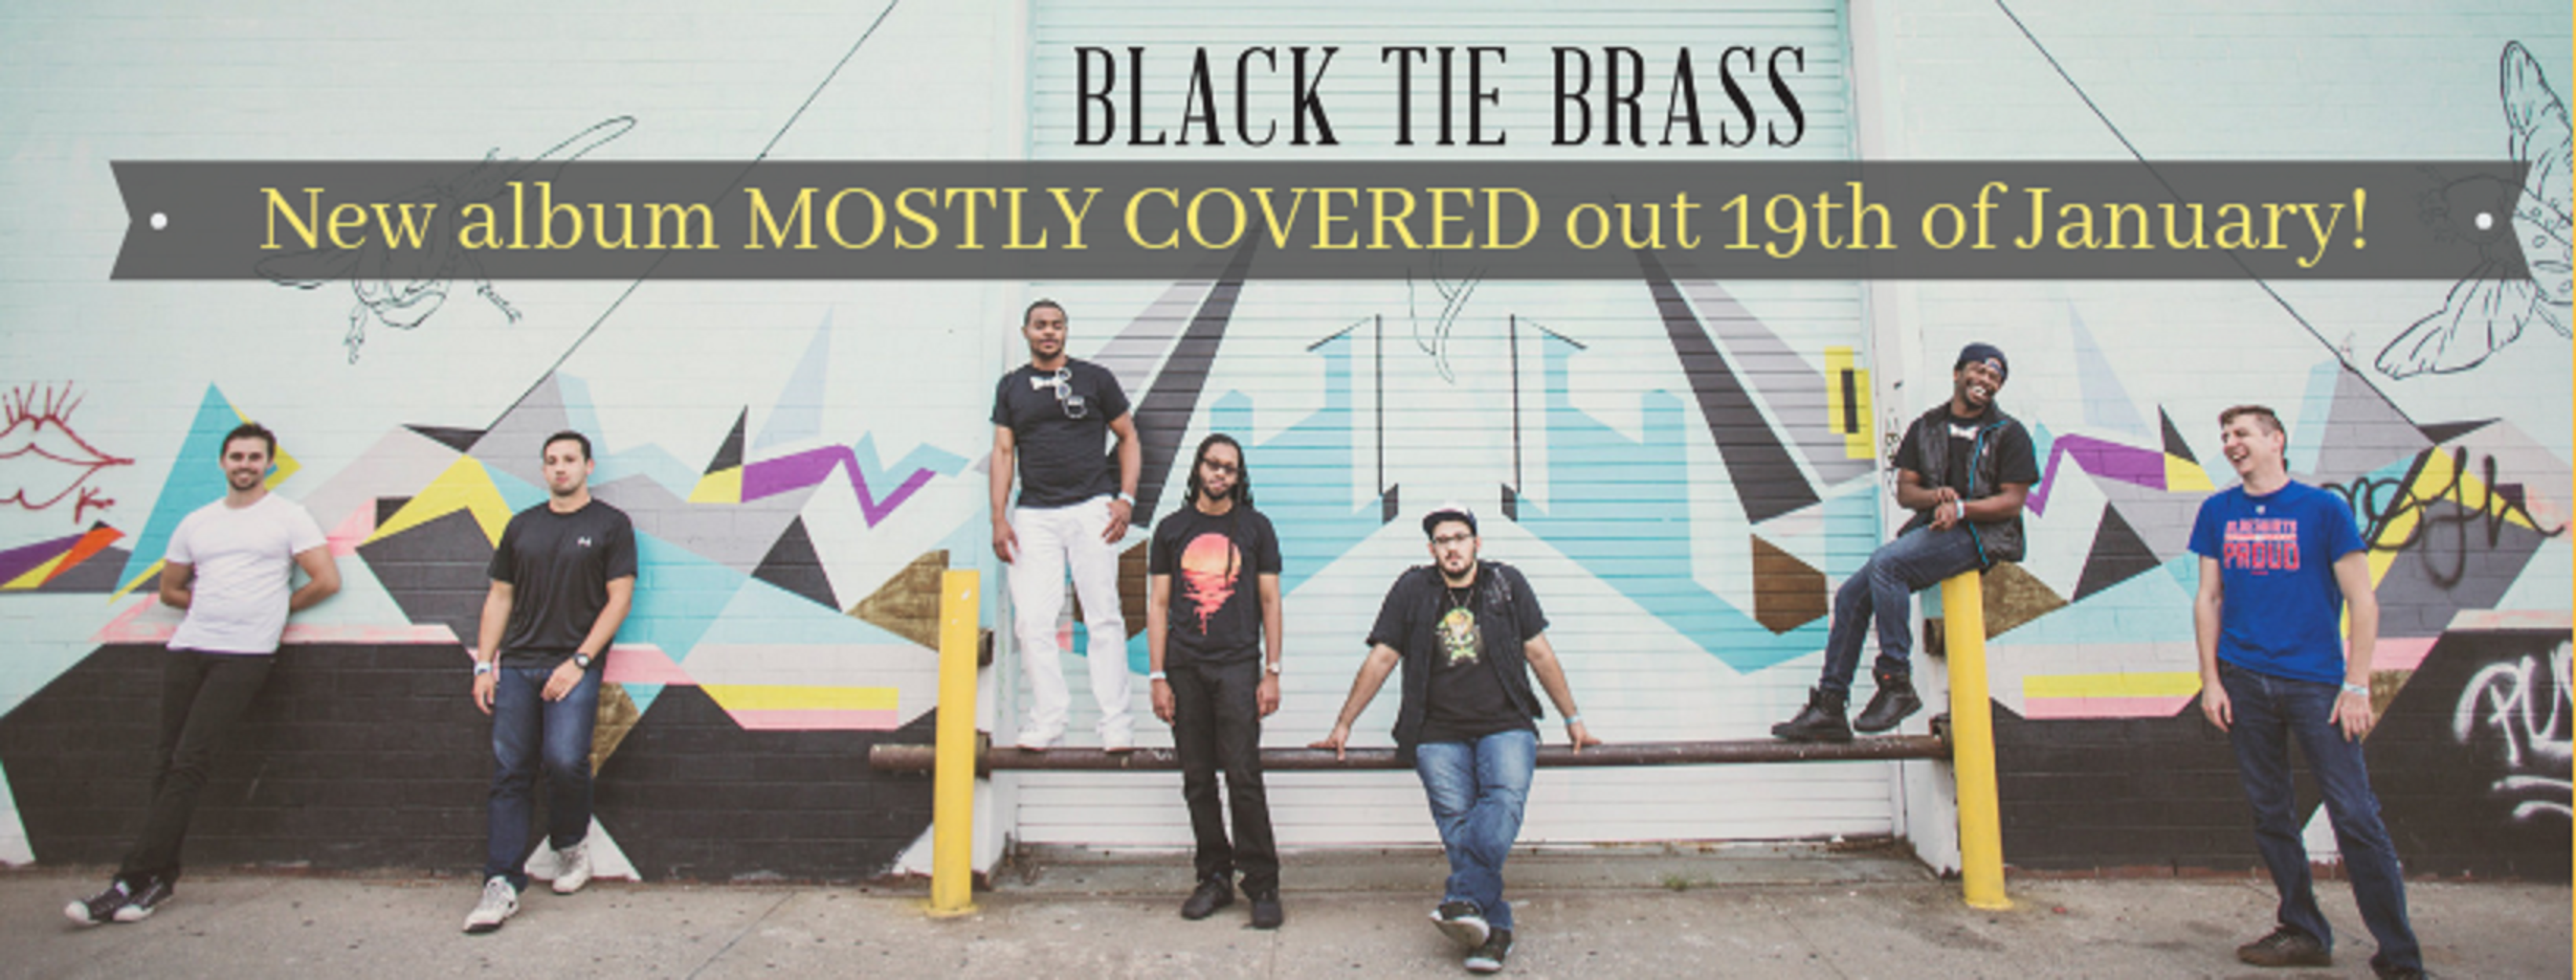 Black Tie Brass New Album Out January 19